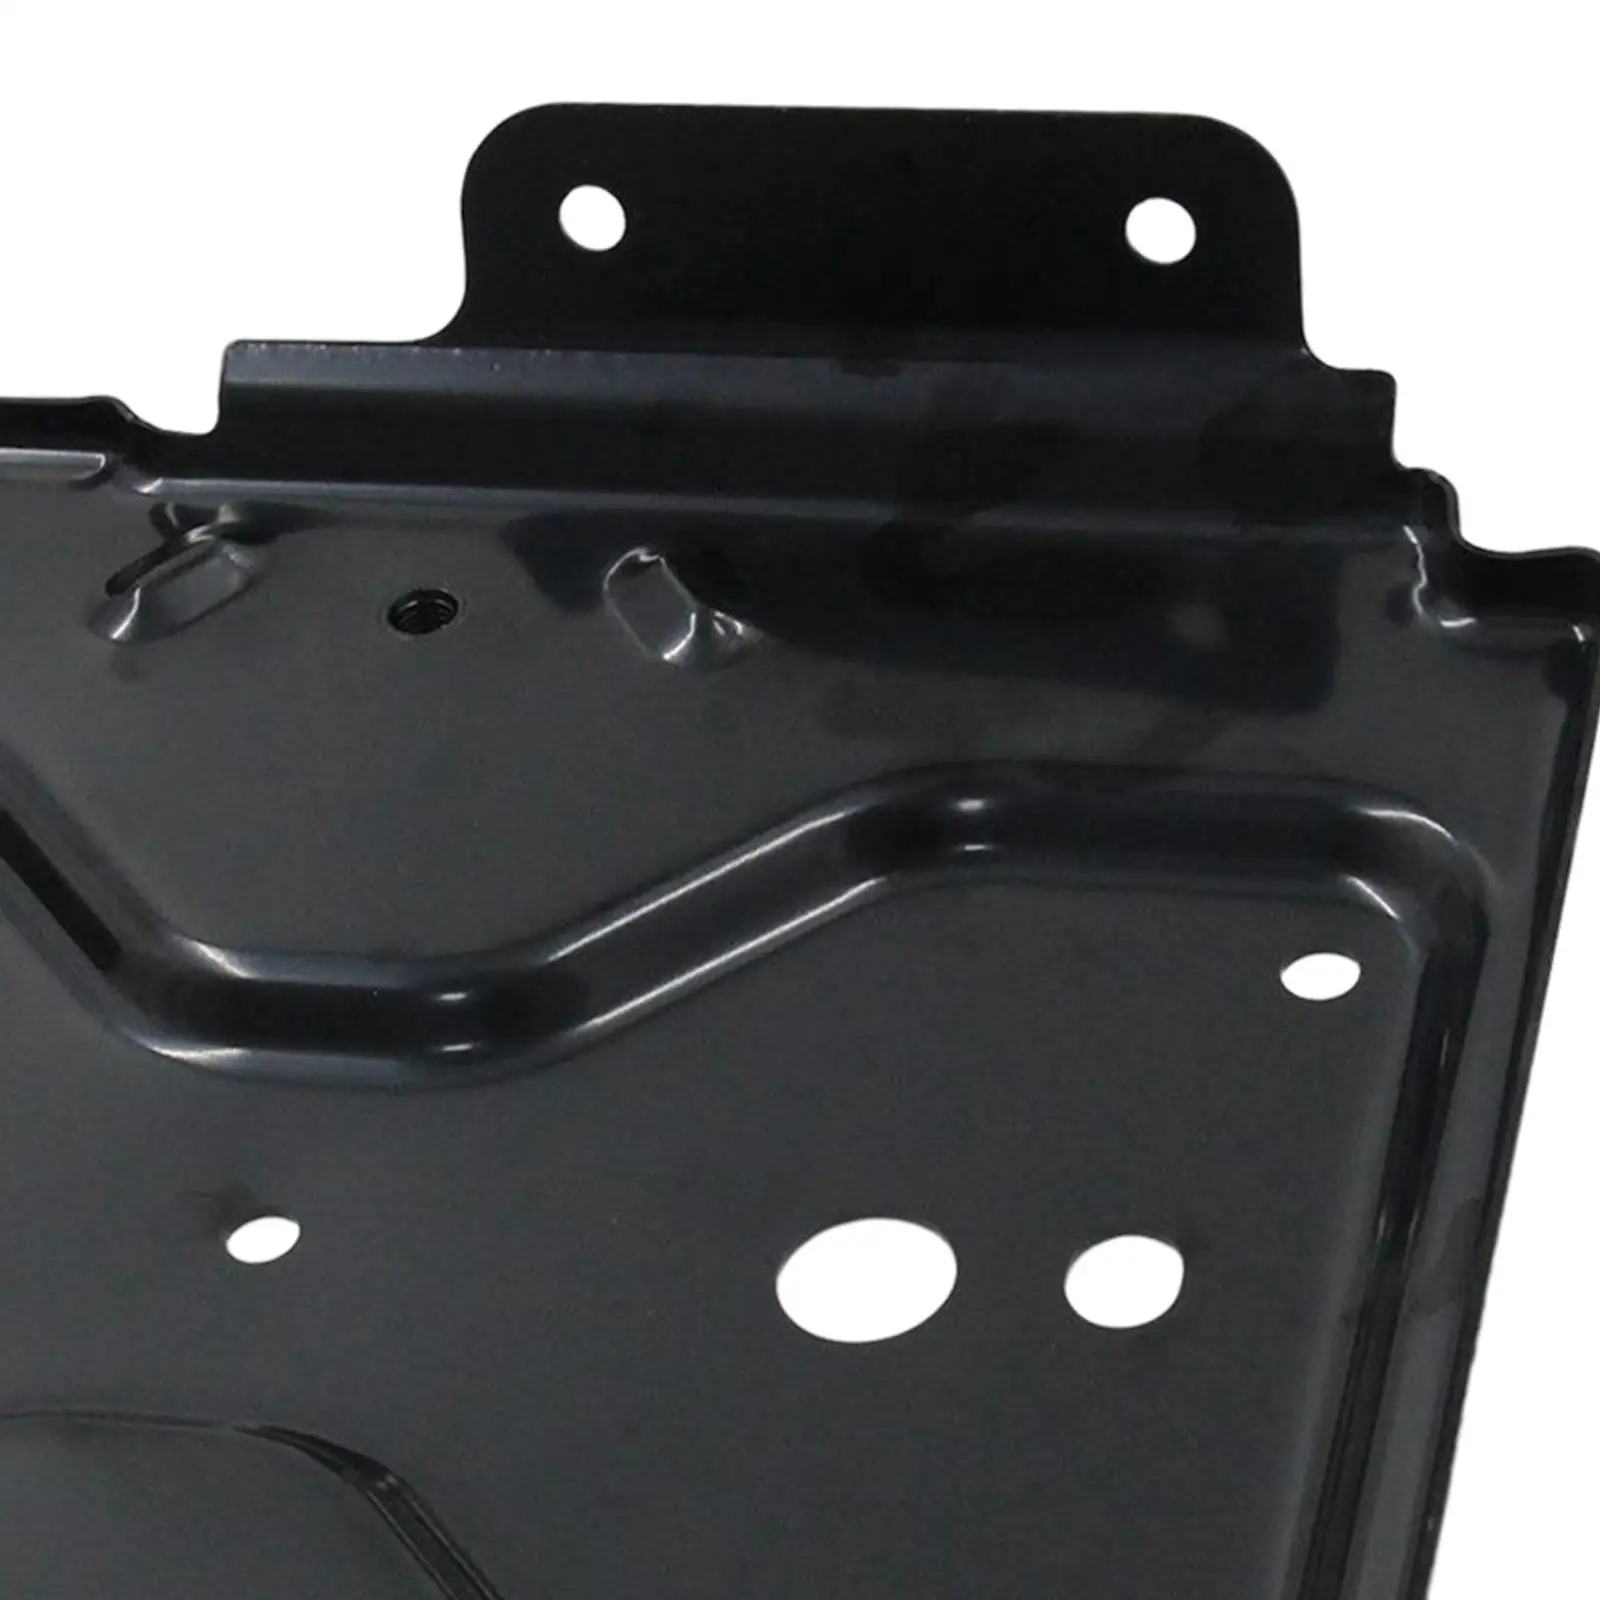 Battery Tray Easy to Install Durable Premium Replaces Spare Parts Car Accessories for Chevrolet Silverado 1500